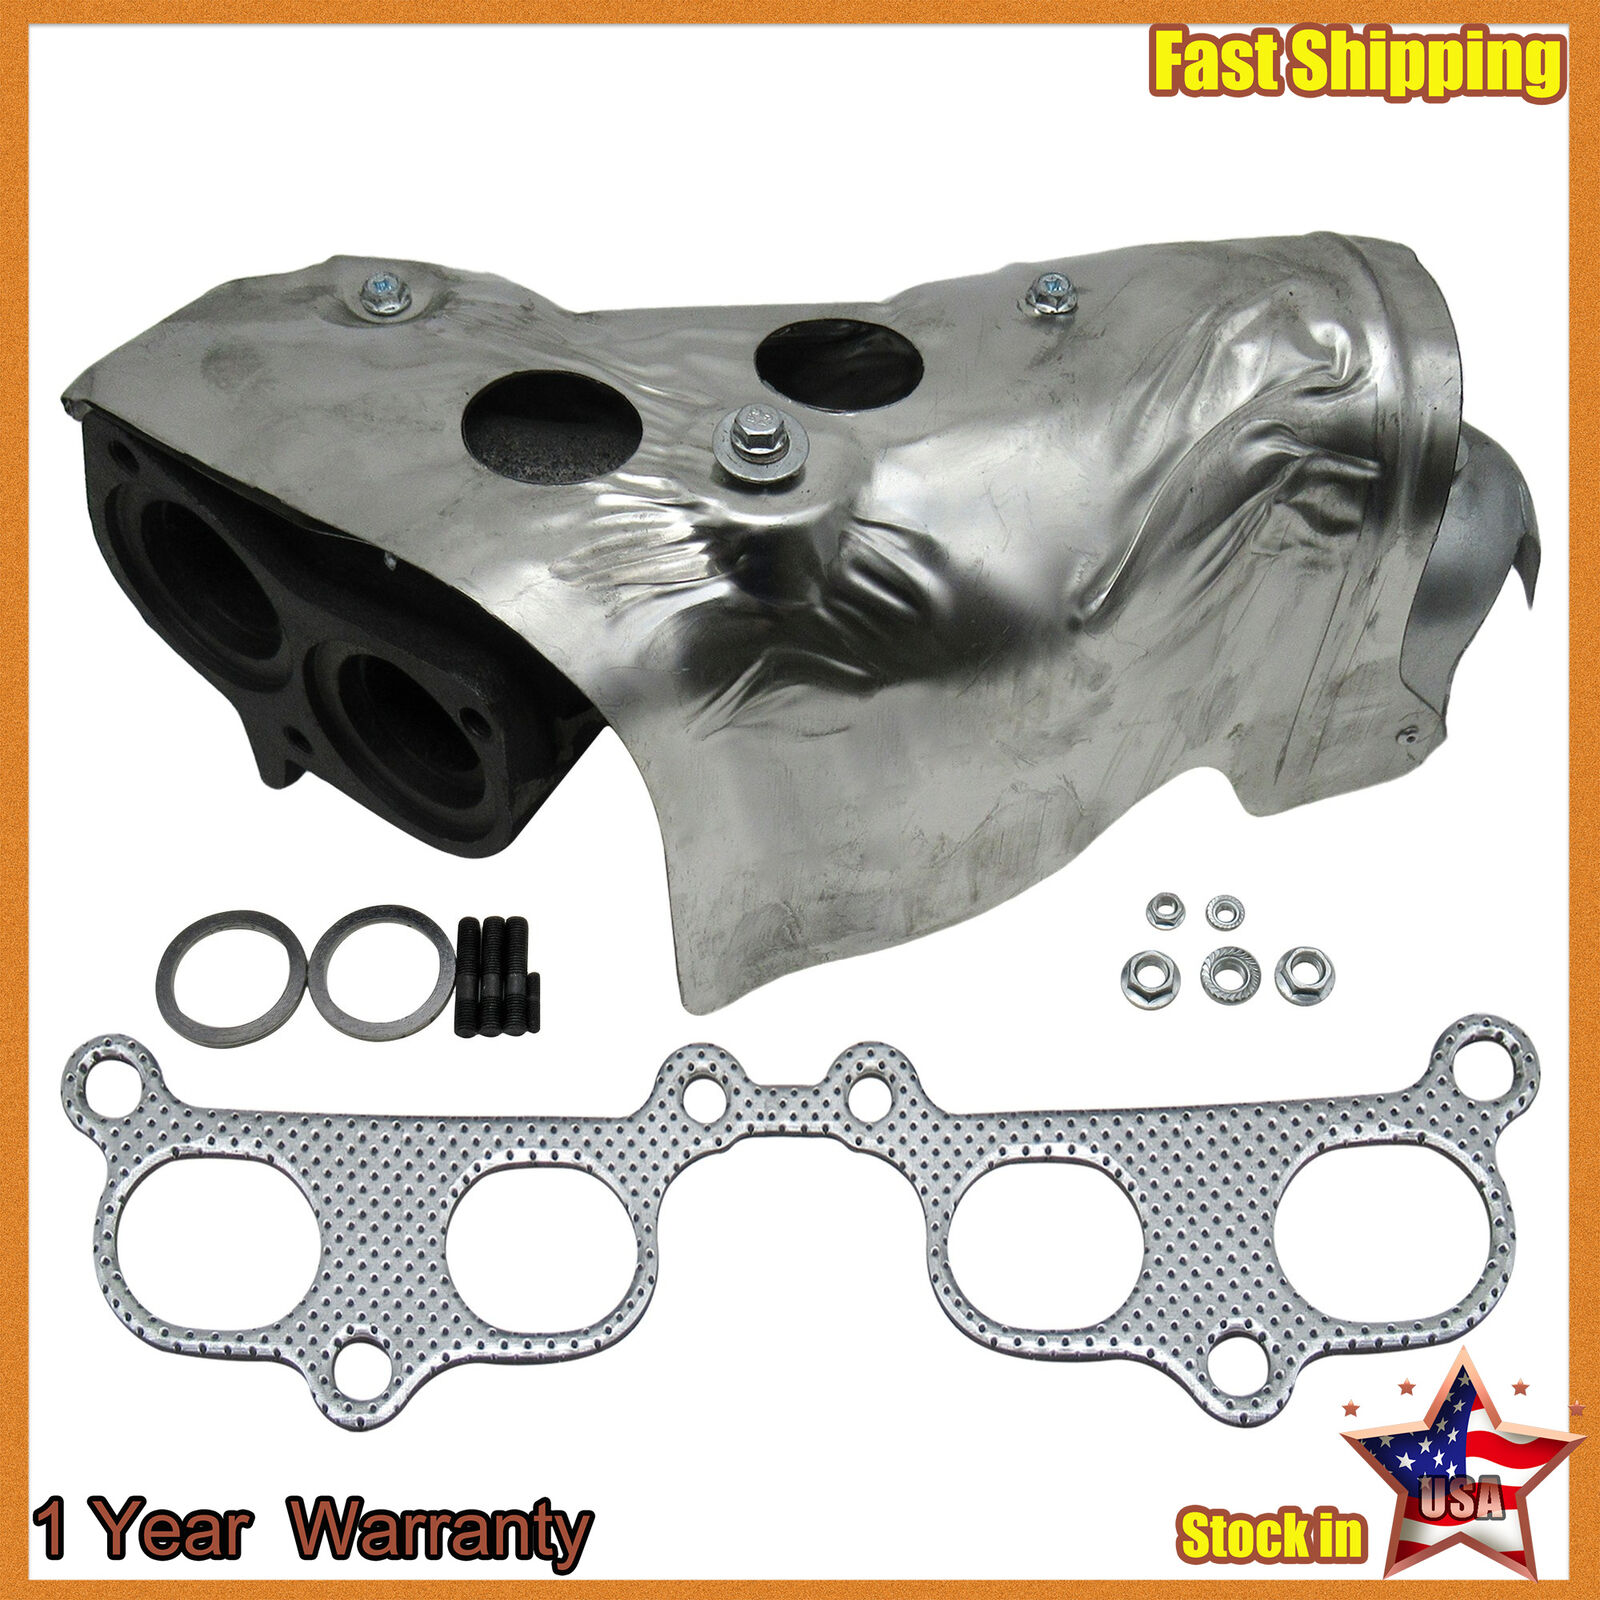 Exhaust Manifold & Gasket Kit Front Fit 1995-2000 Toyota Tacoma 4Runner T100